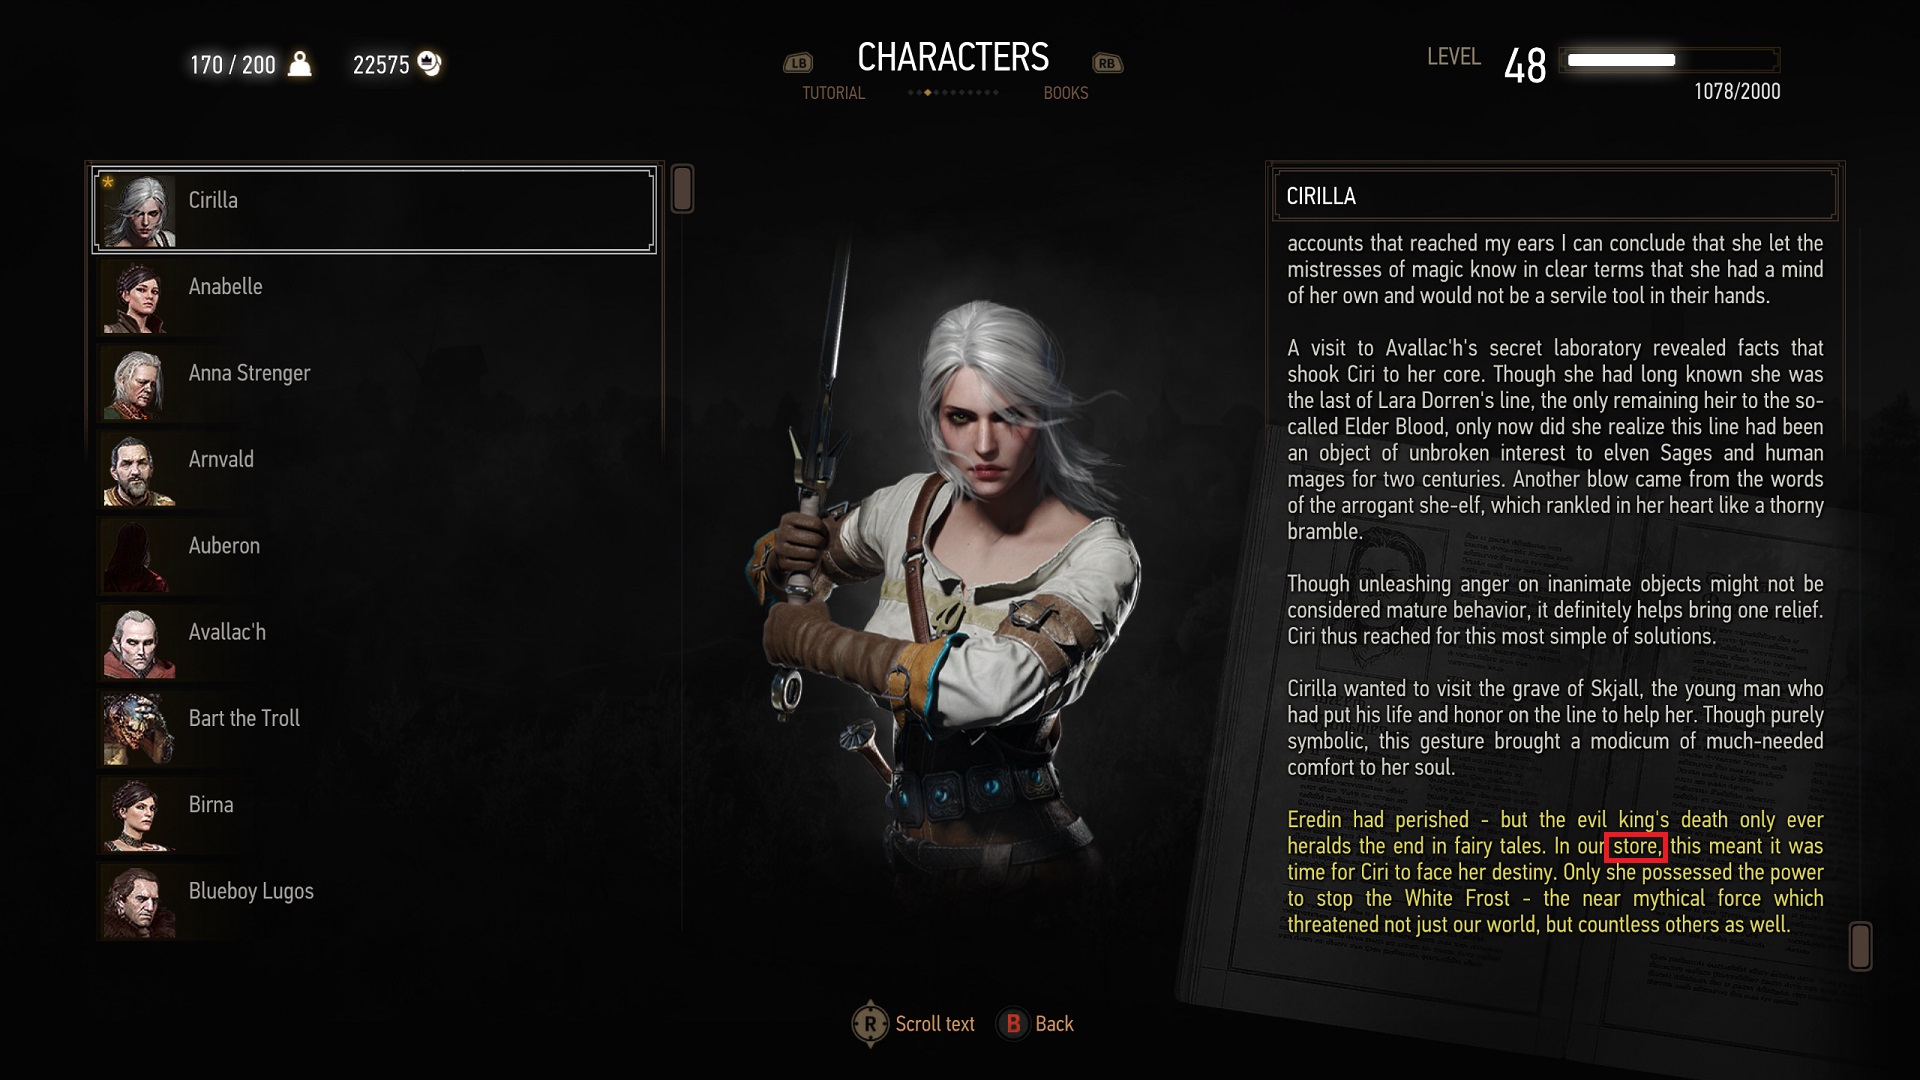 Witcher 3 modder fixes the game’s grammer and speling